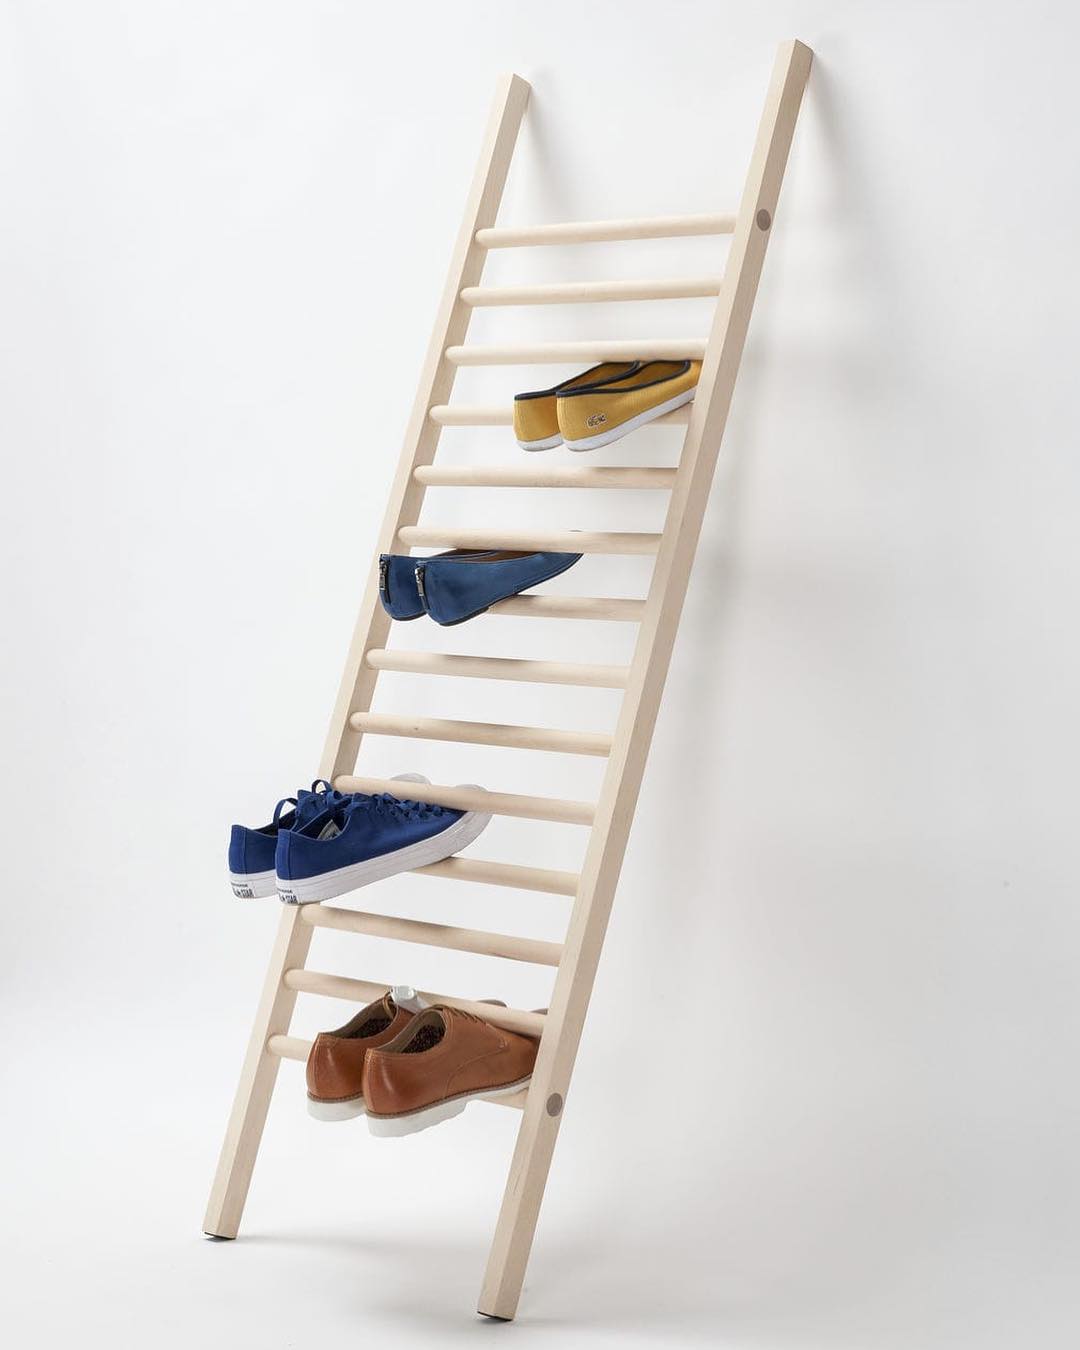 a wooden ladder leaning against a blank wall to hold shoes is a simple yet effective way to store shoes vertically